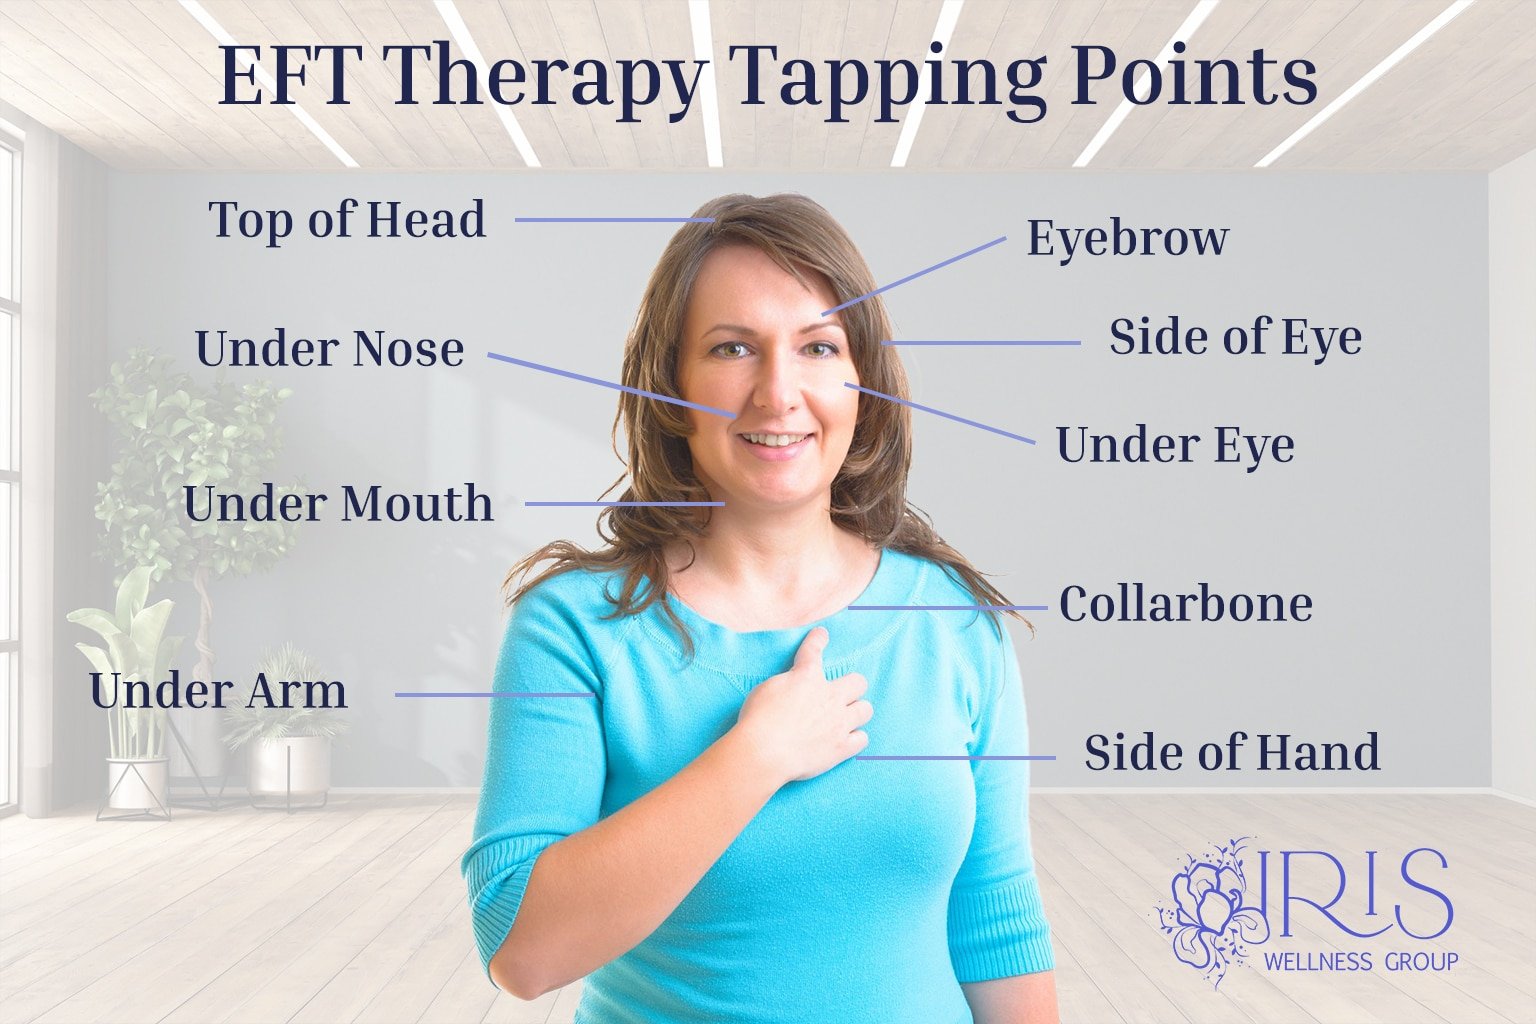 EFT Therapy Tapping Points